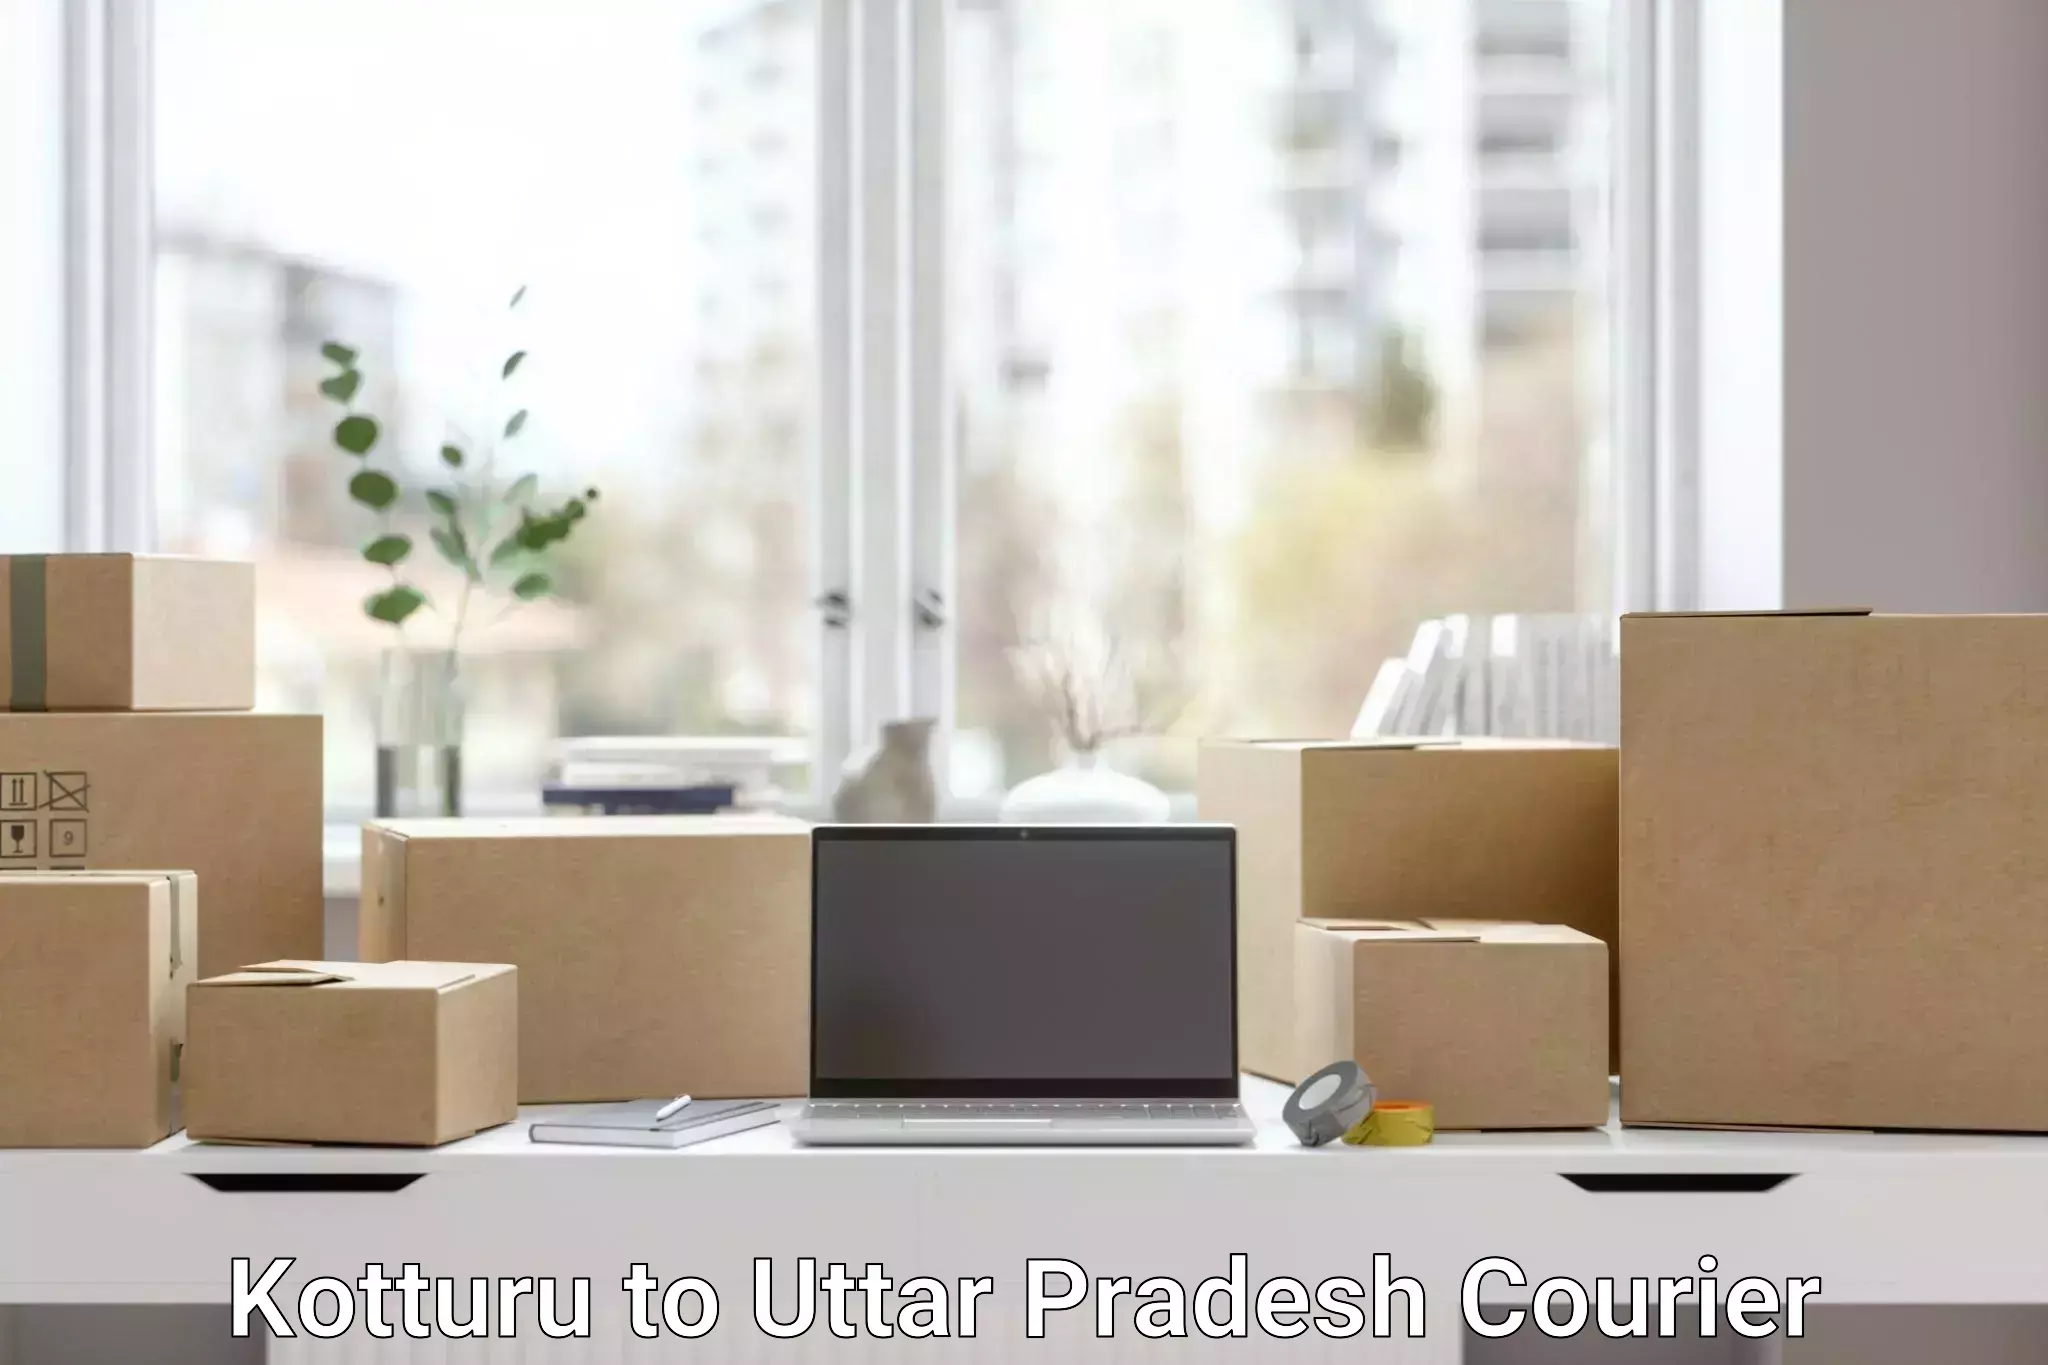 Easy access courier services Kotturu to Utraula